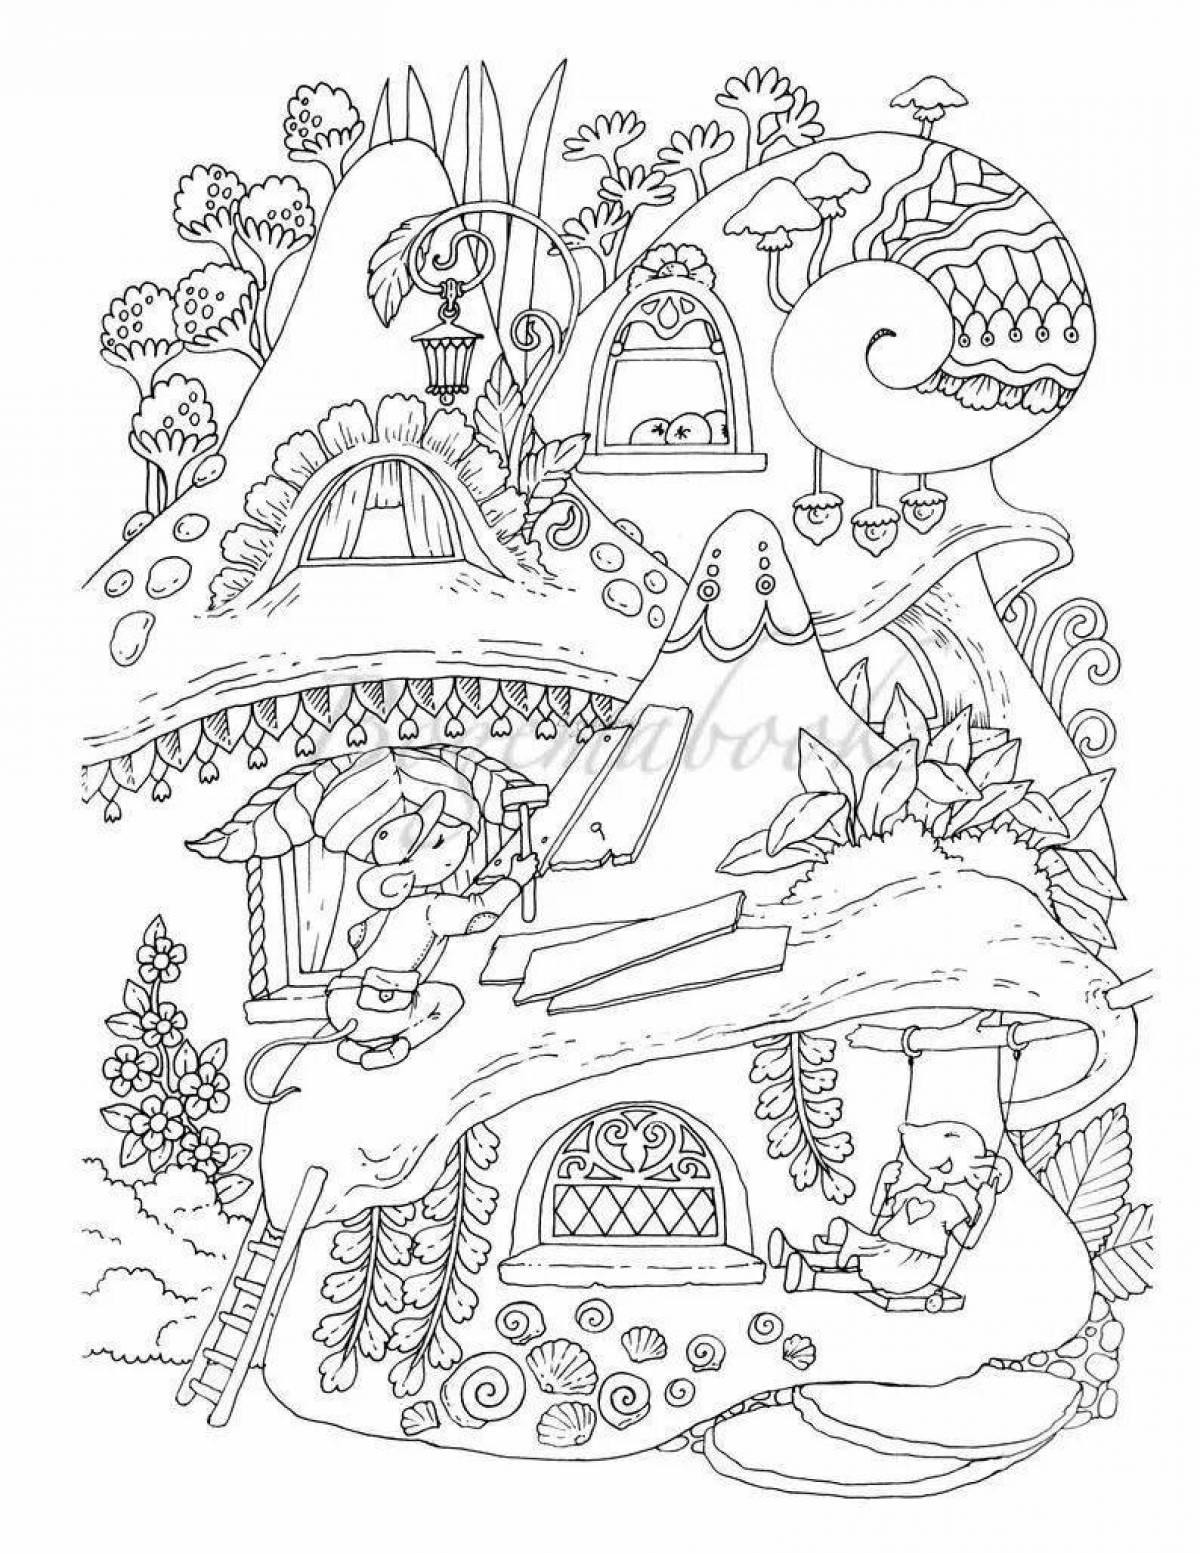 Coloring page gorgeous little town